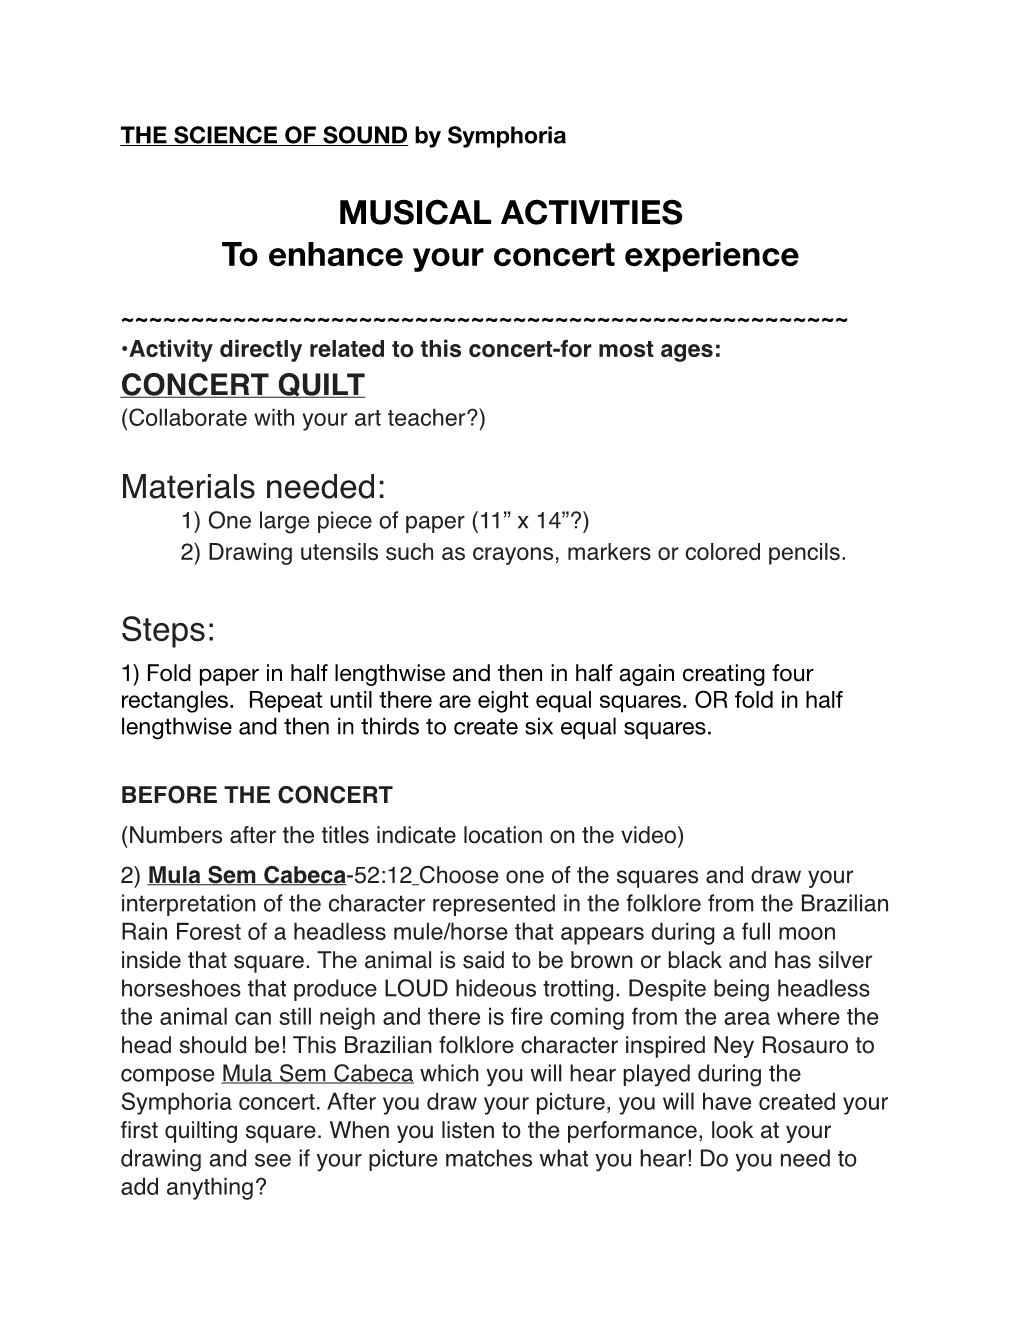 Science of Sound Musical Activities